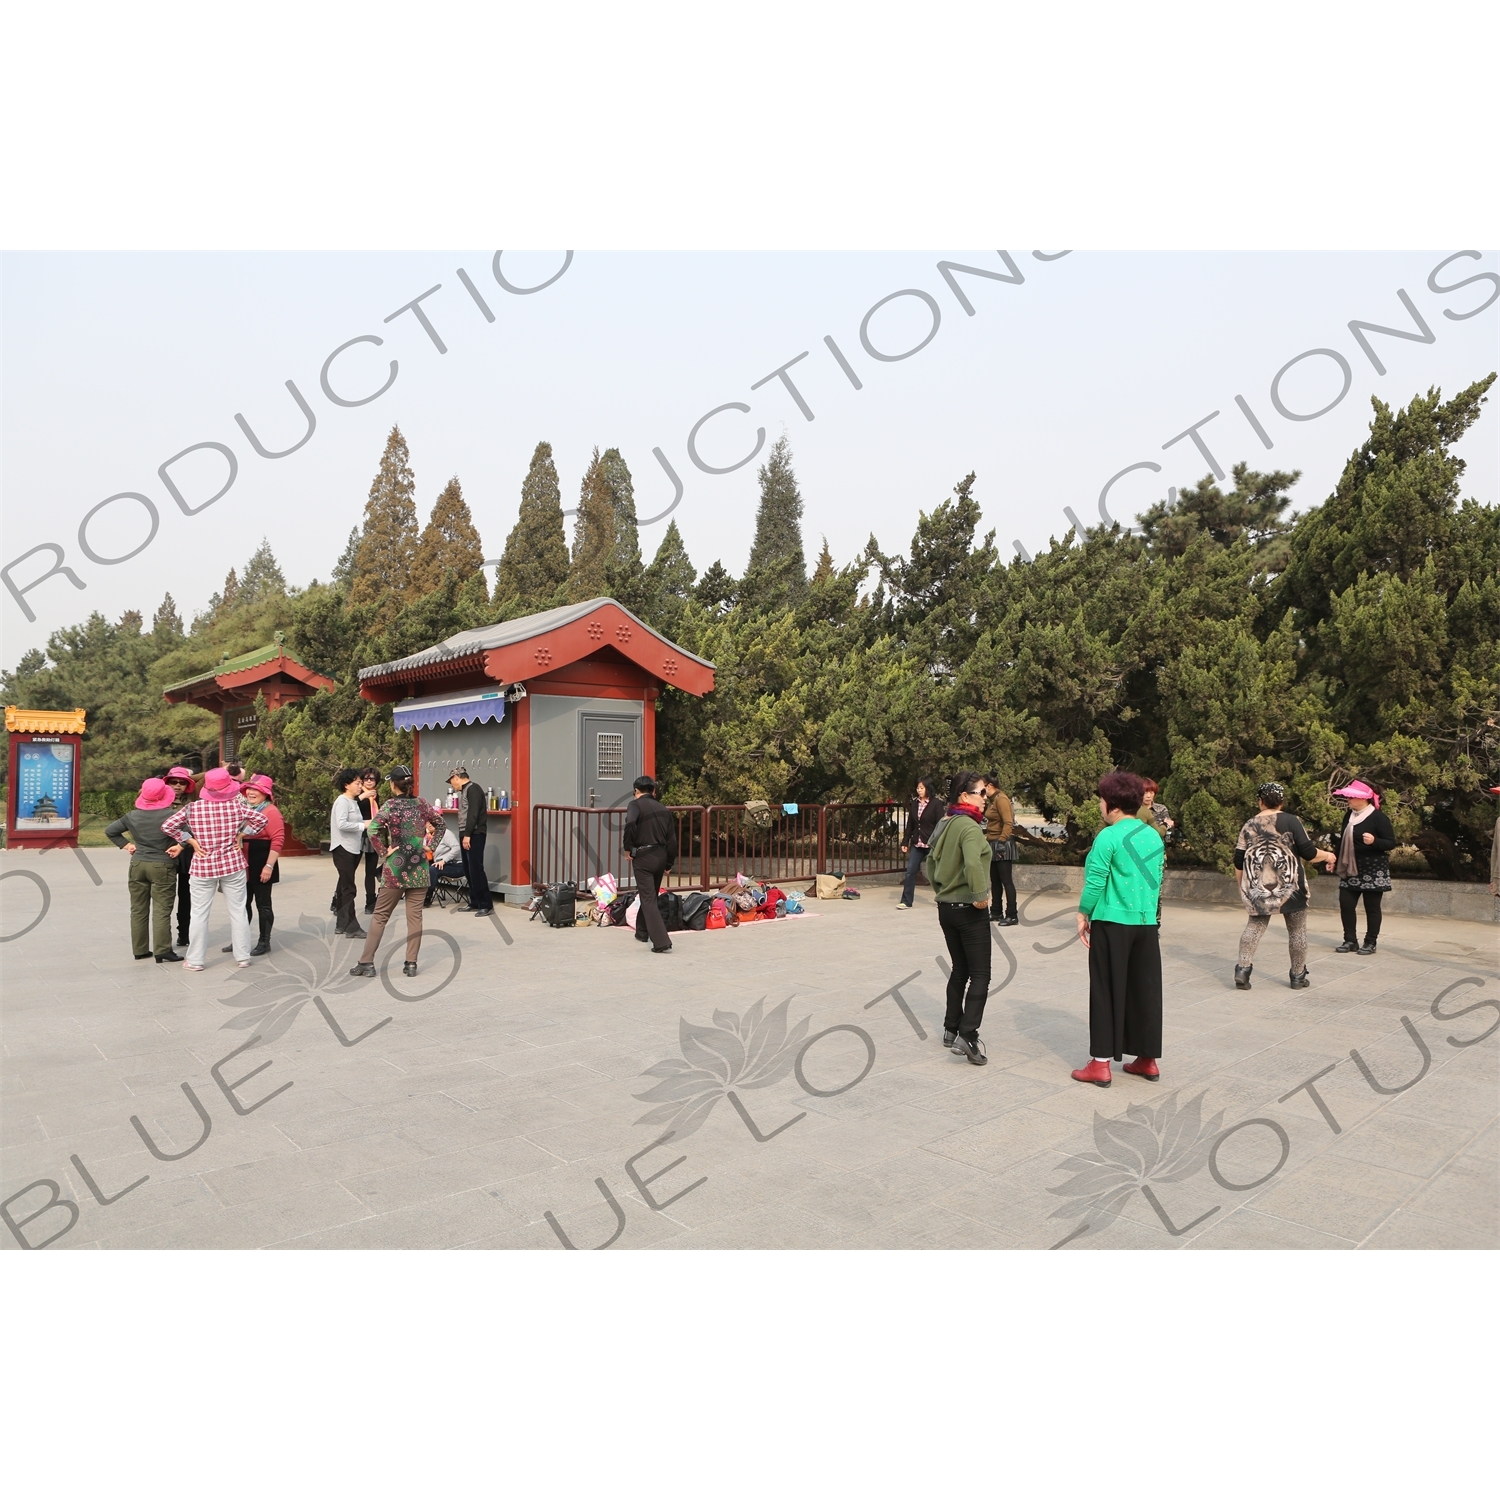 Dance Class Near the North Gate of the Temple of Heaven (Tiantan) in Beijing